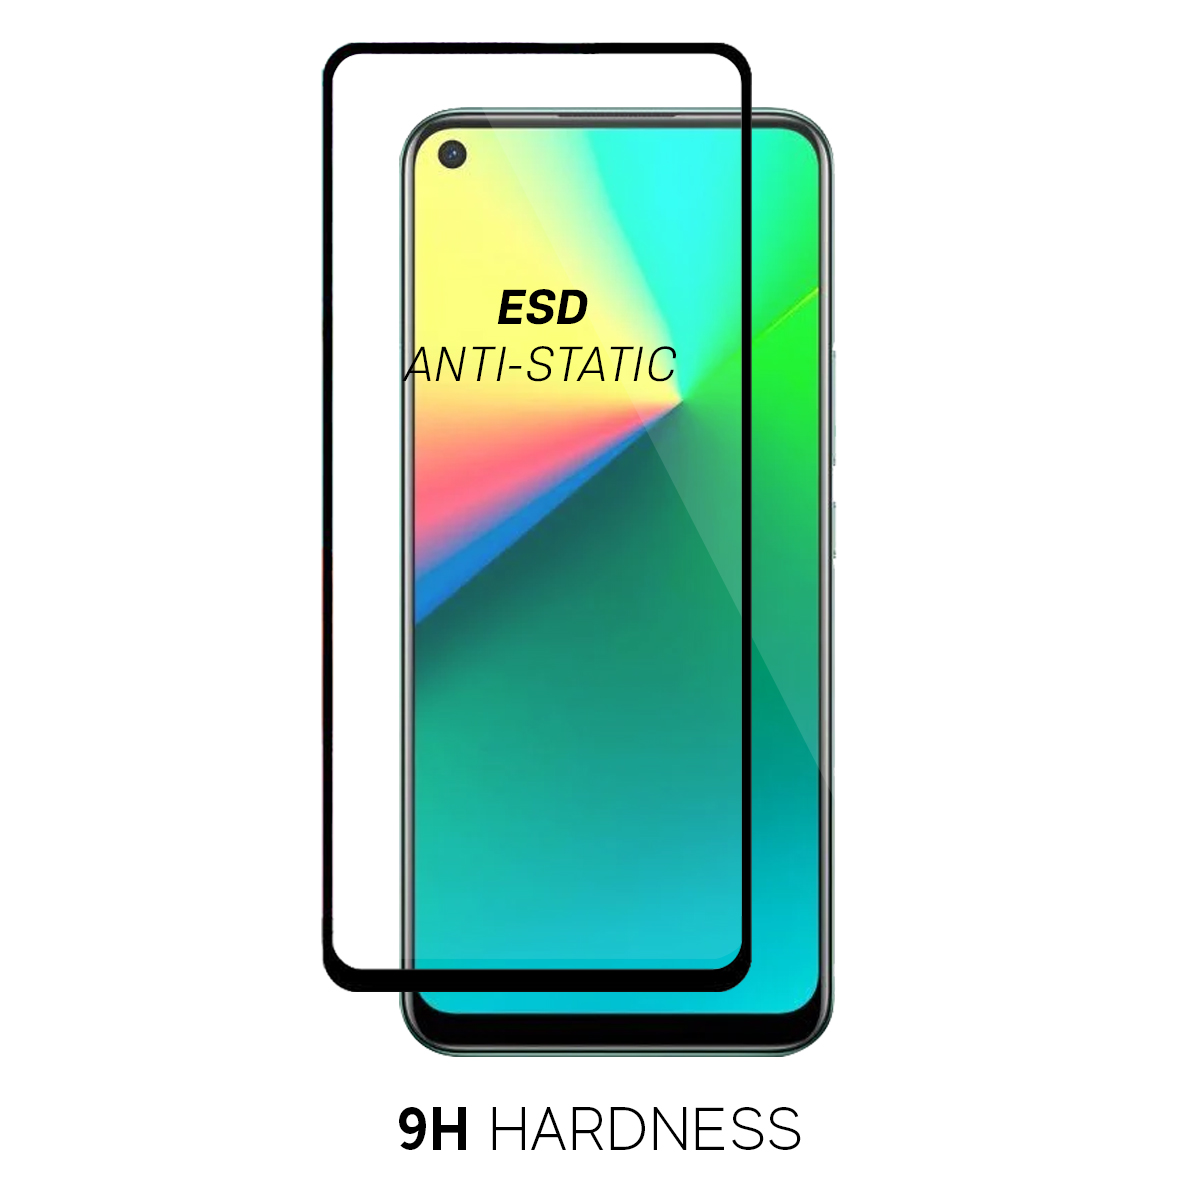 Beyox ESD Anti Static 5D Glass for Oppo A31